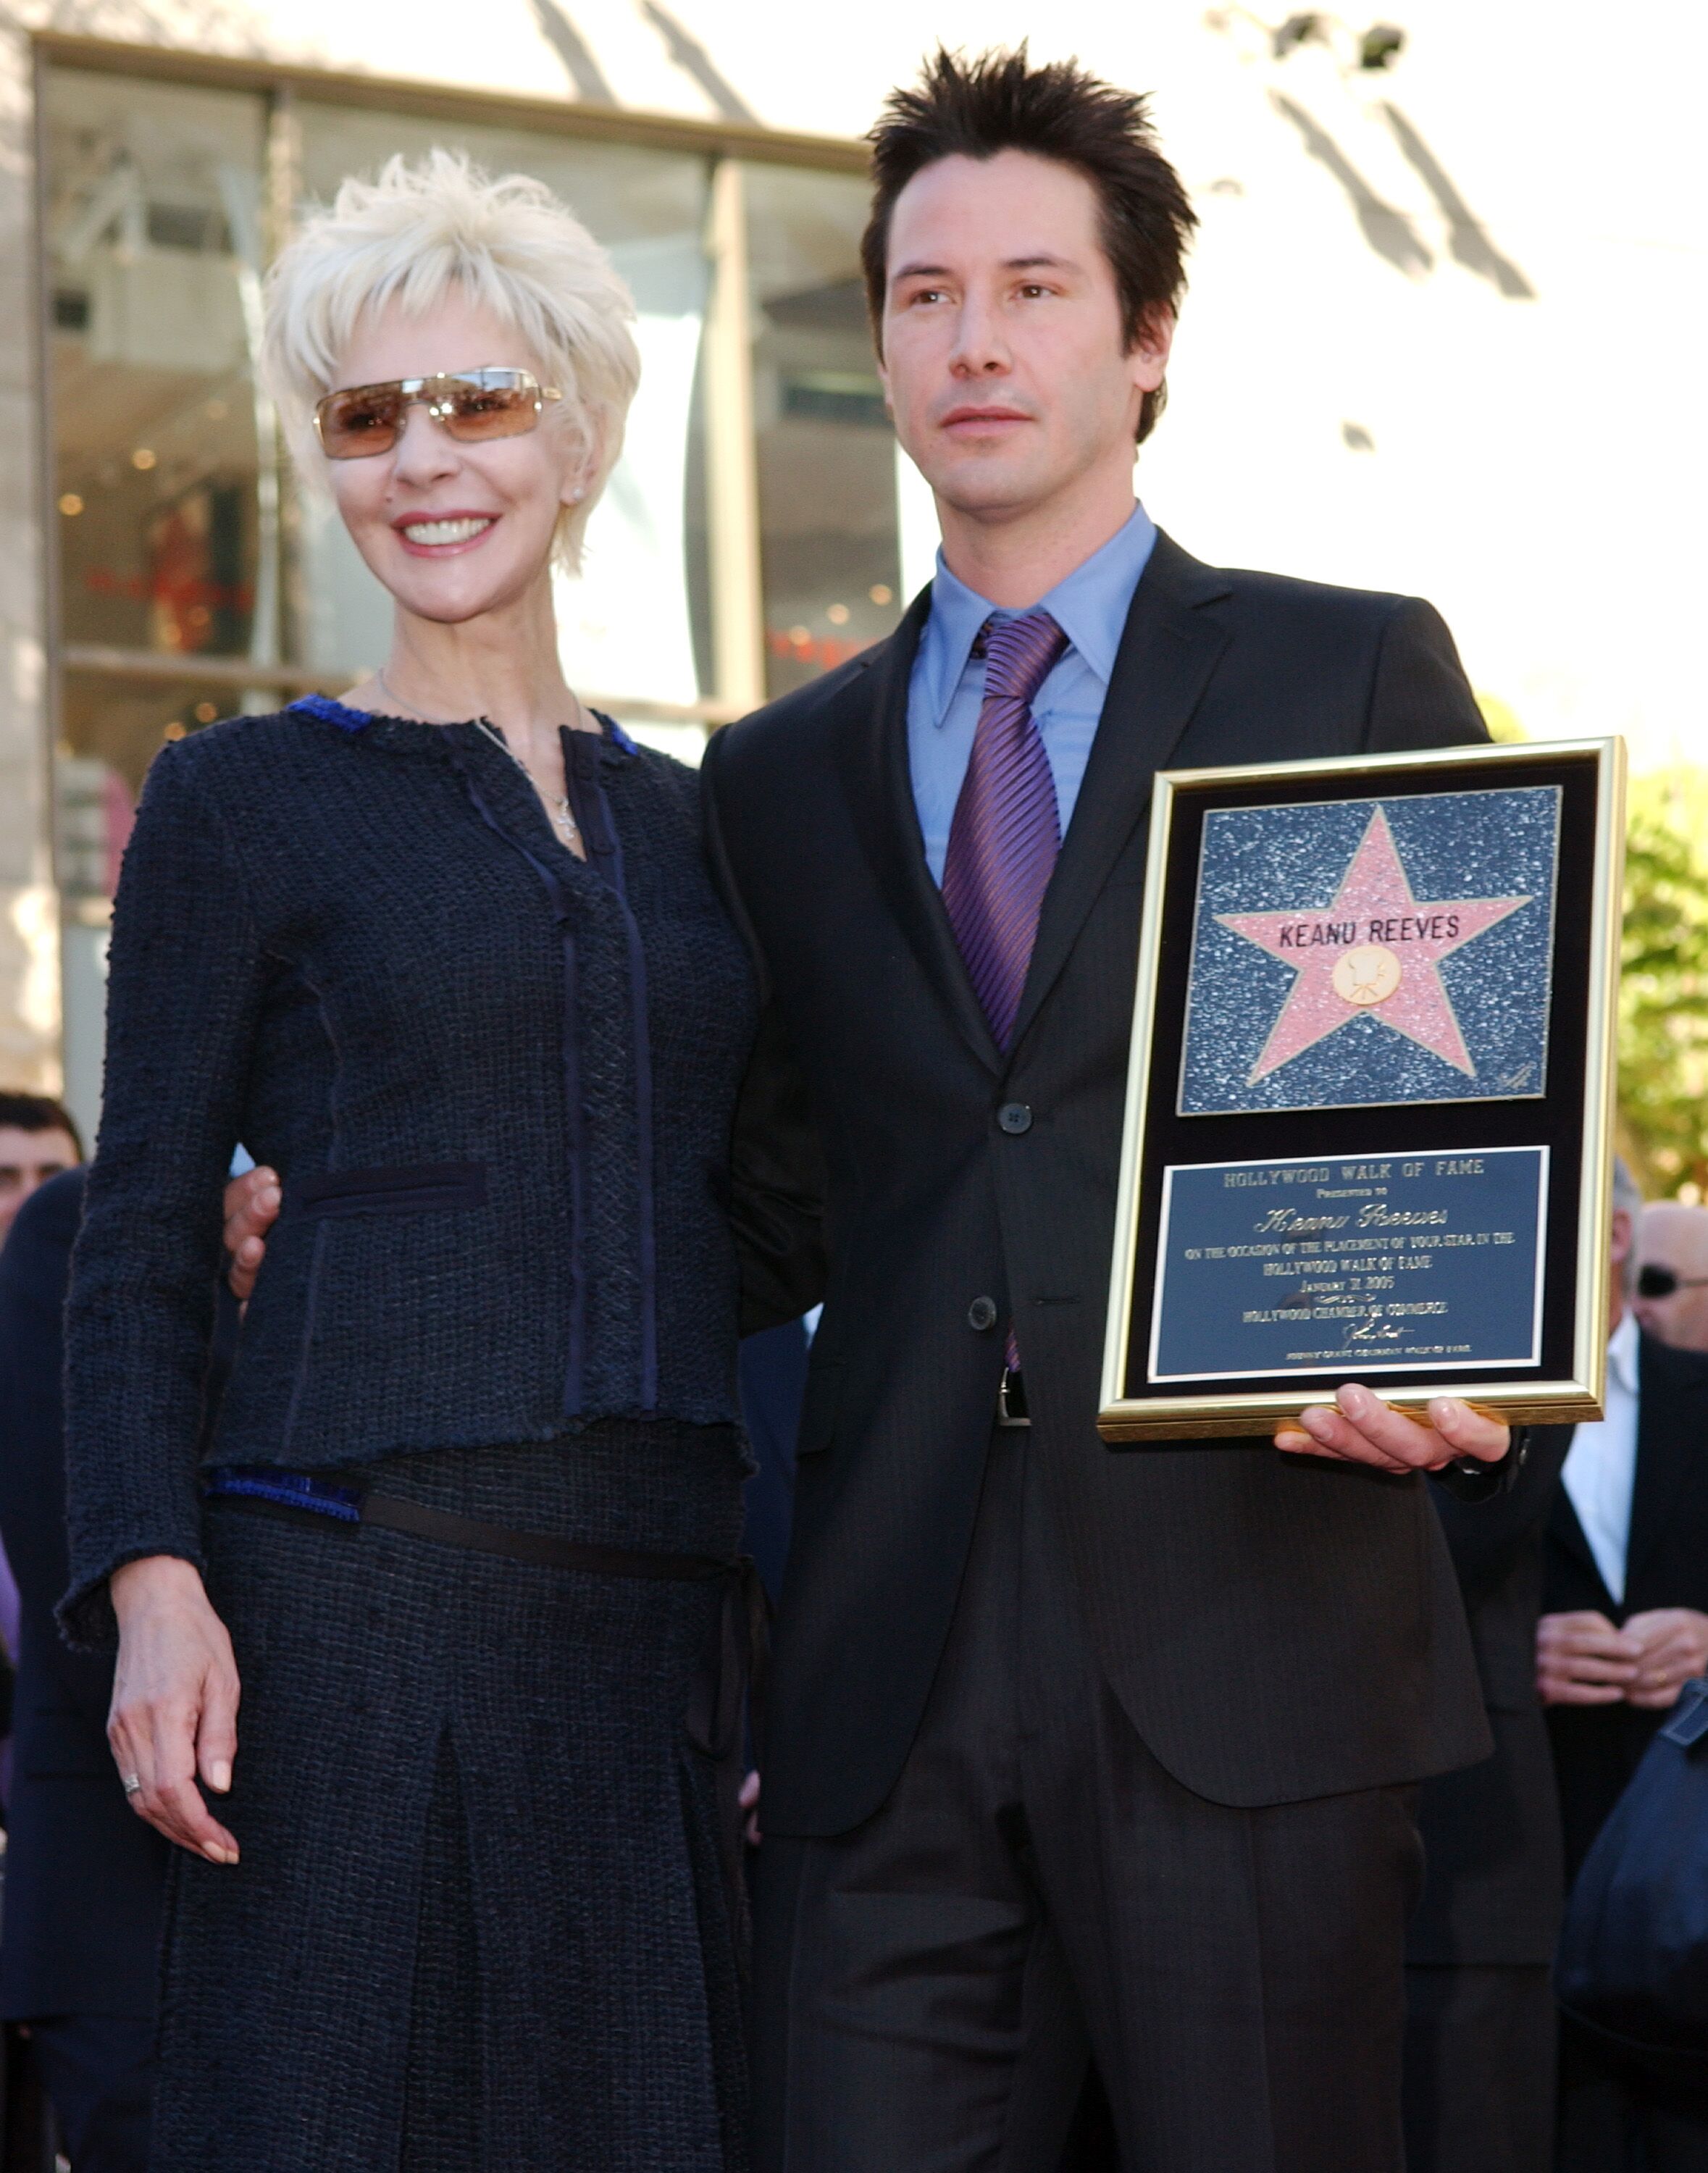  Patricia Taylor at the ceremony honoring Keanu Reeves with a star on the Hollywood Walk of Fame in 2005| Source: Getty Images